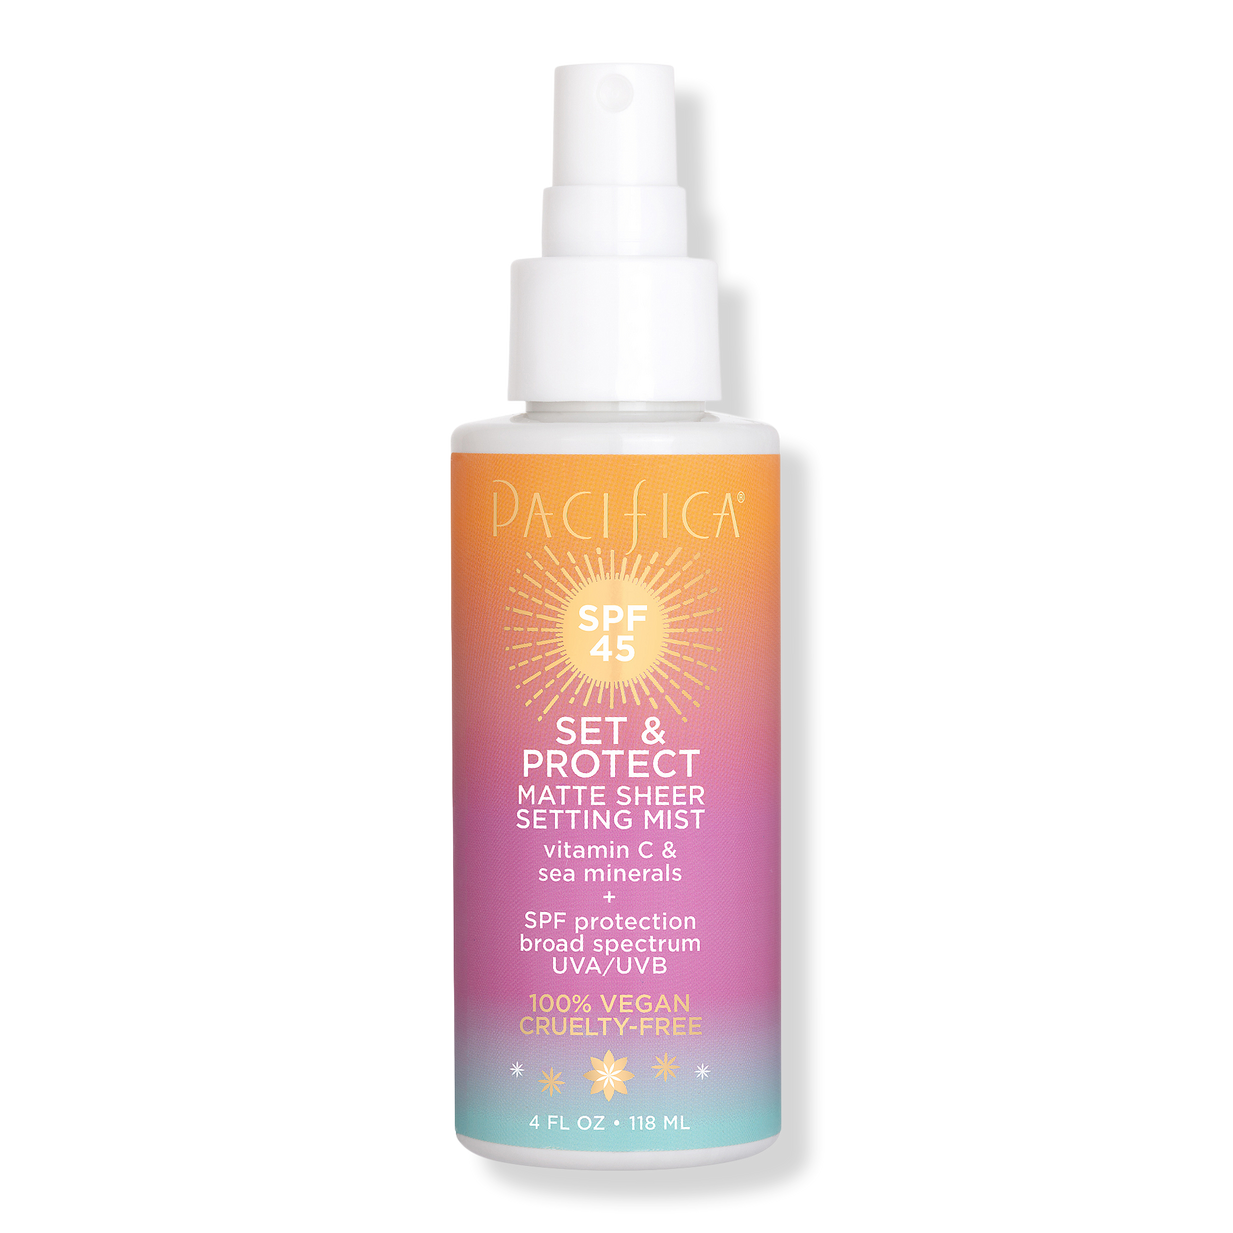 Set & C Protect SPF 45 Matte Sheer Setting Mist - Pacifica